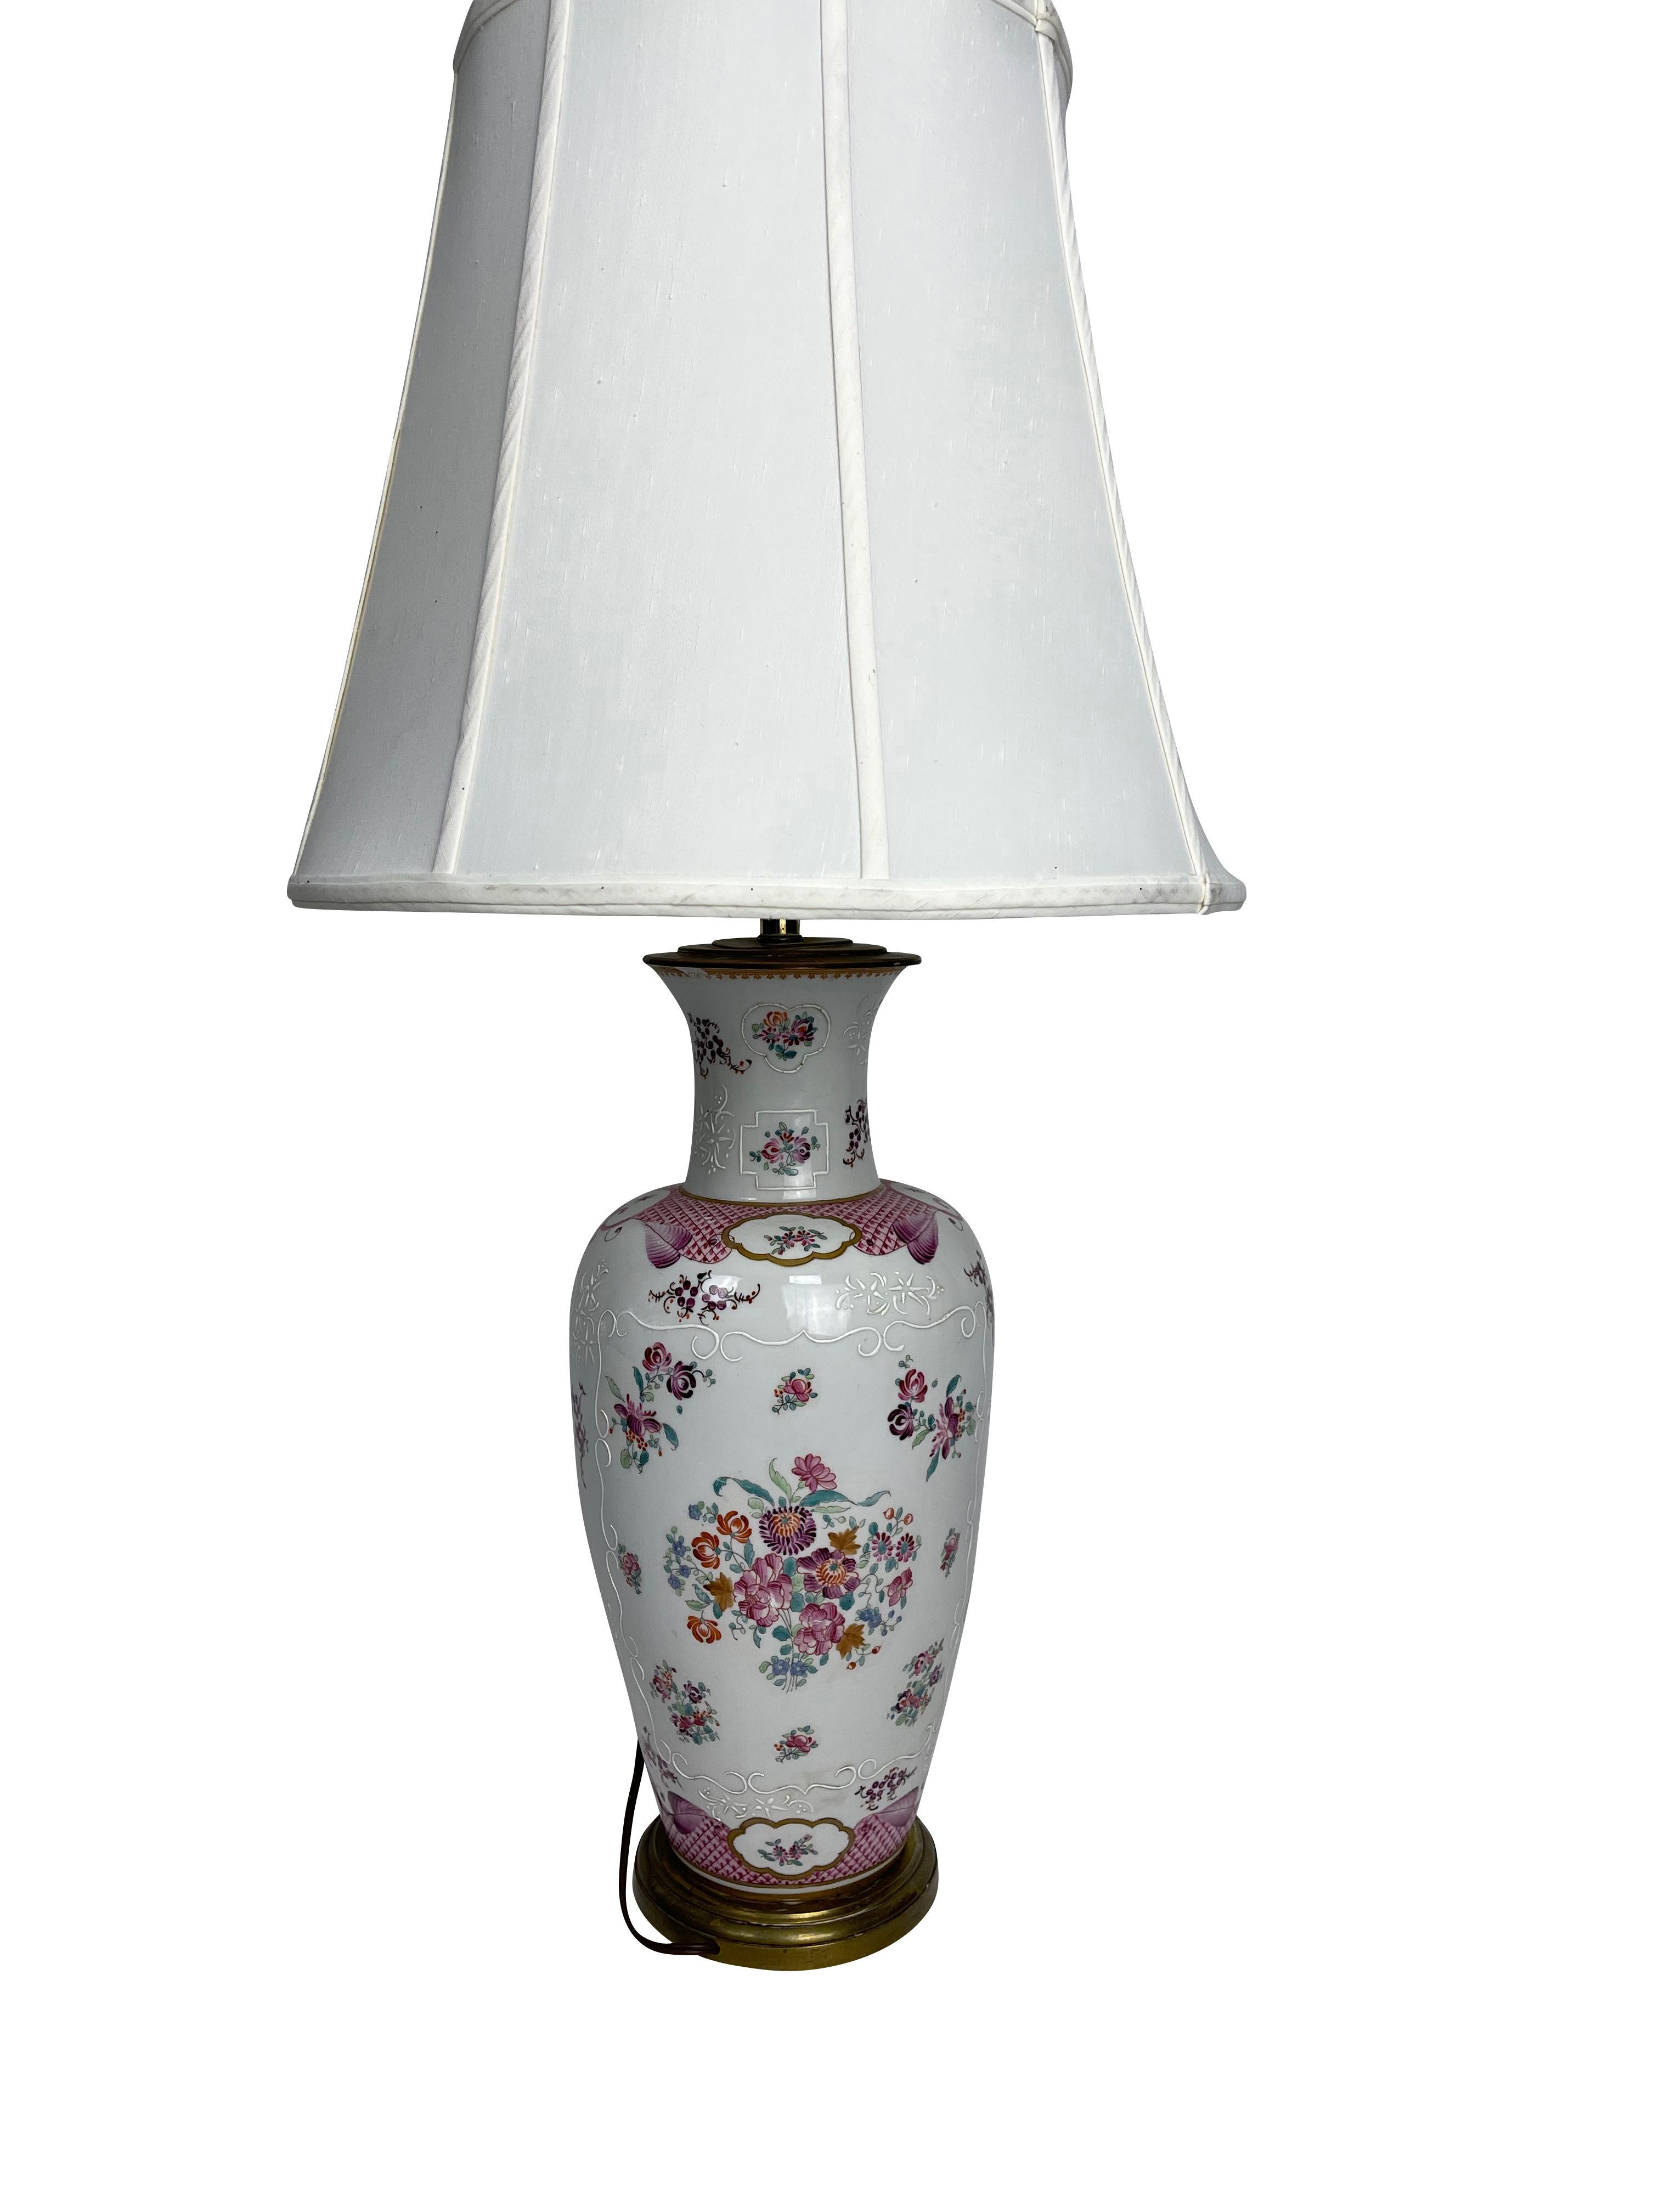 White Chinese Export Samson Armorial Lamp with Order of the Garter Decoration In Good Condition For Sale In Essex, MA